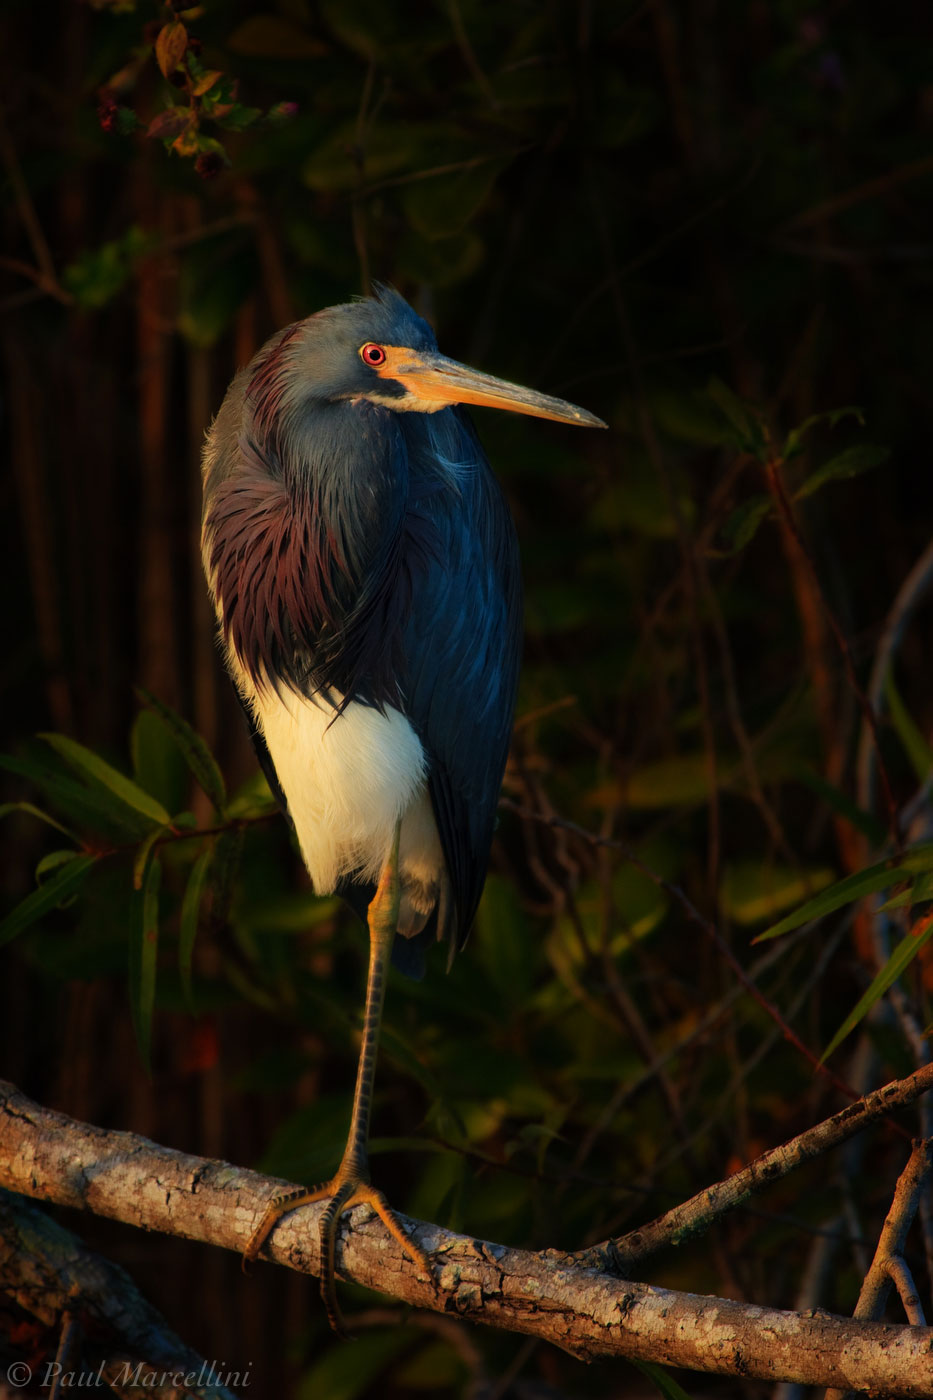 A Tricolored Heron (Egretta tricolor) in the last rays of the day.